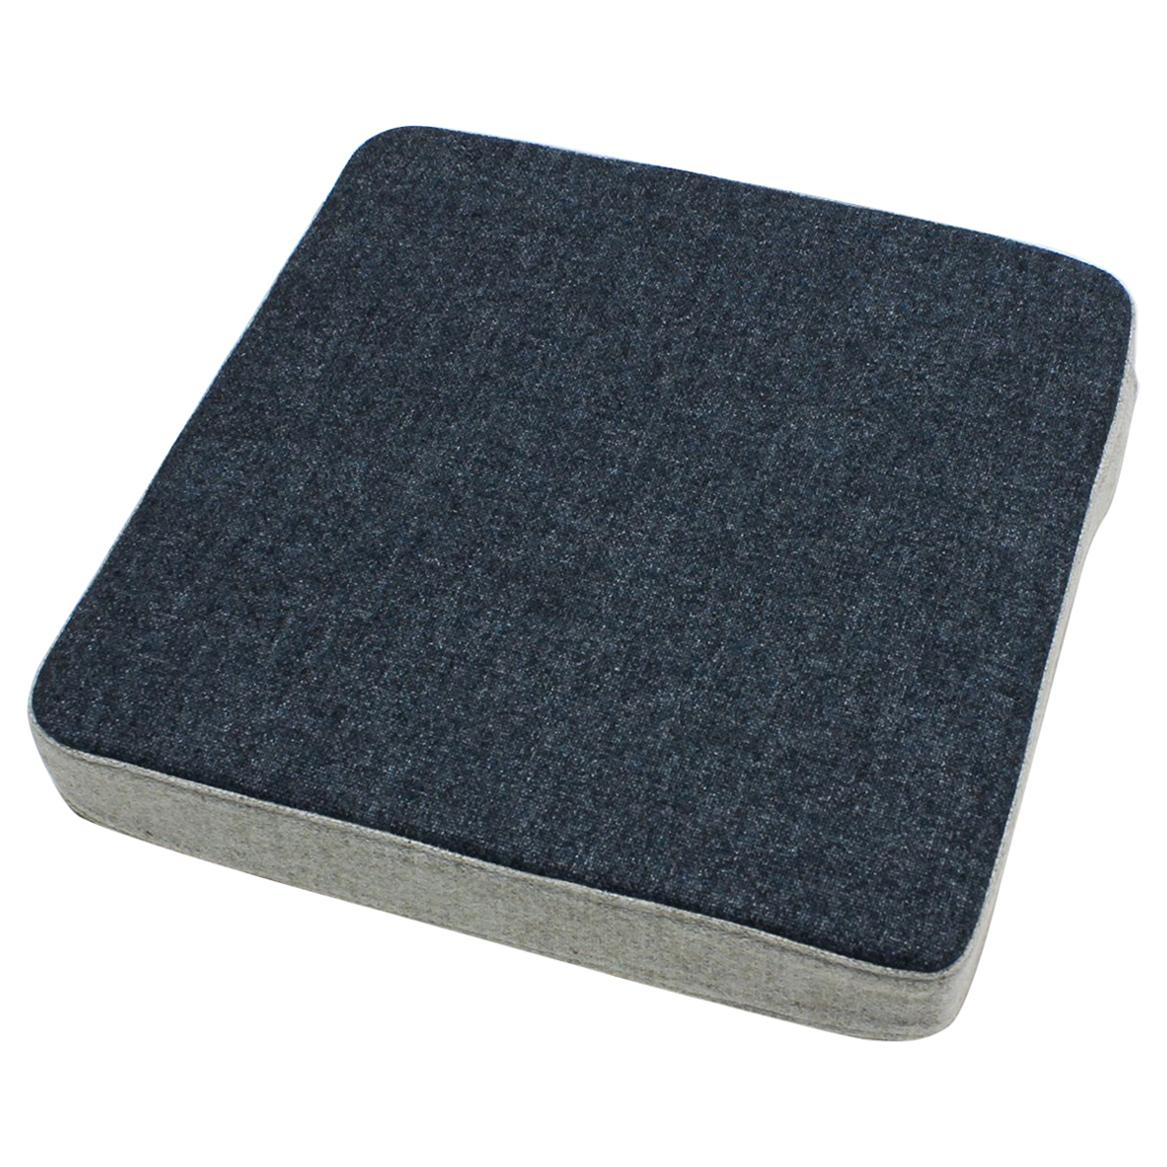 OPE, Ope Select, Cushion / Sound Absorber, Black im Angebot